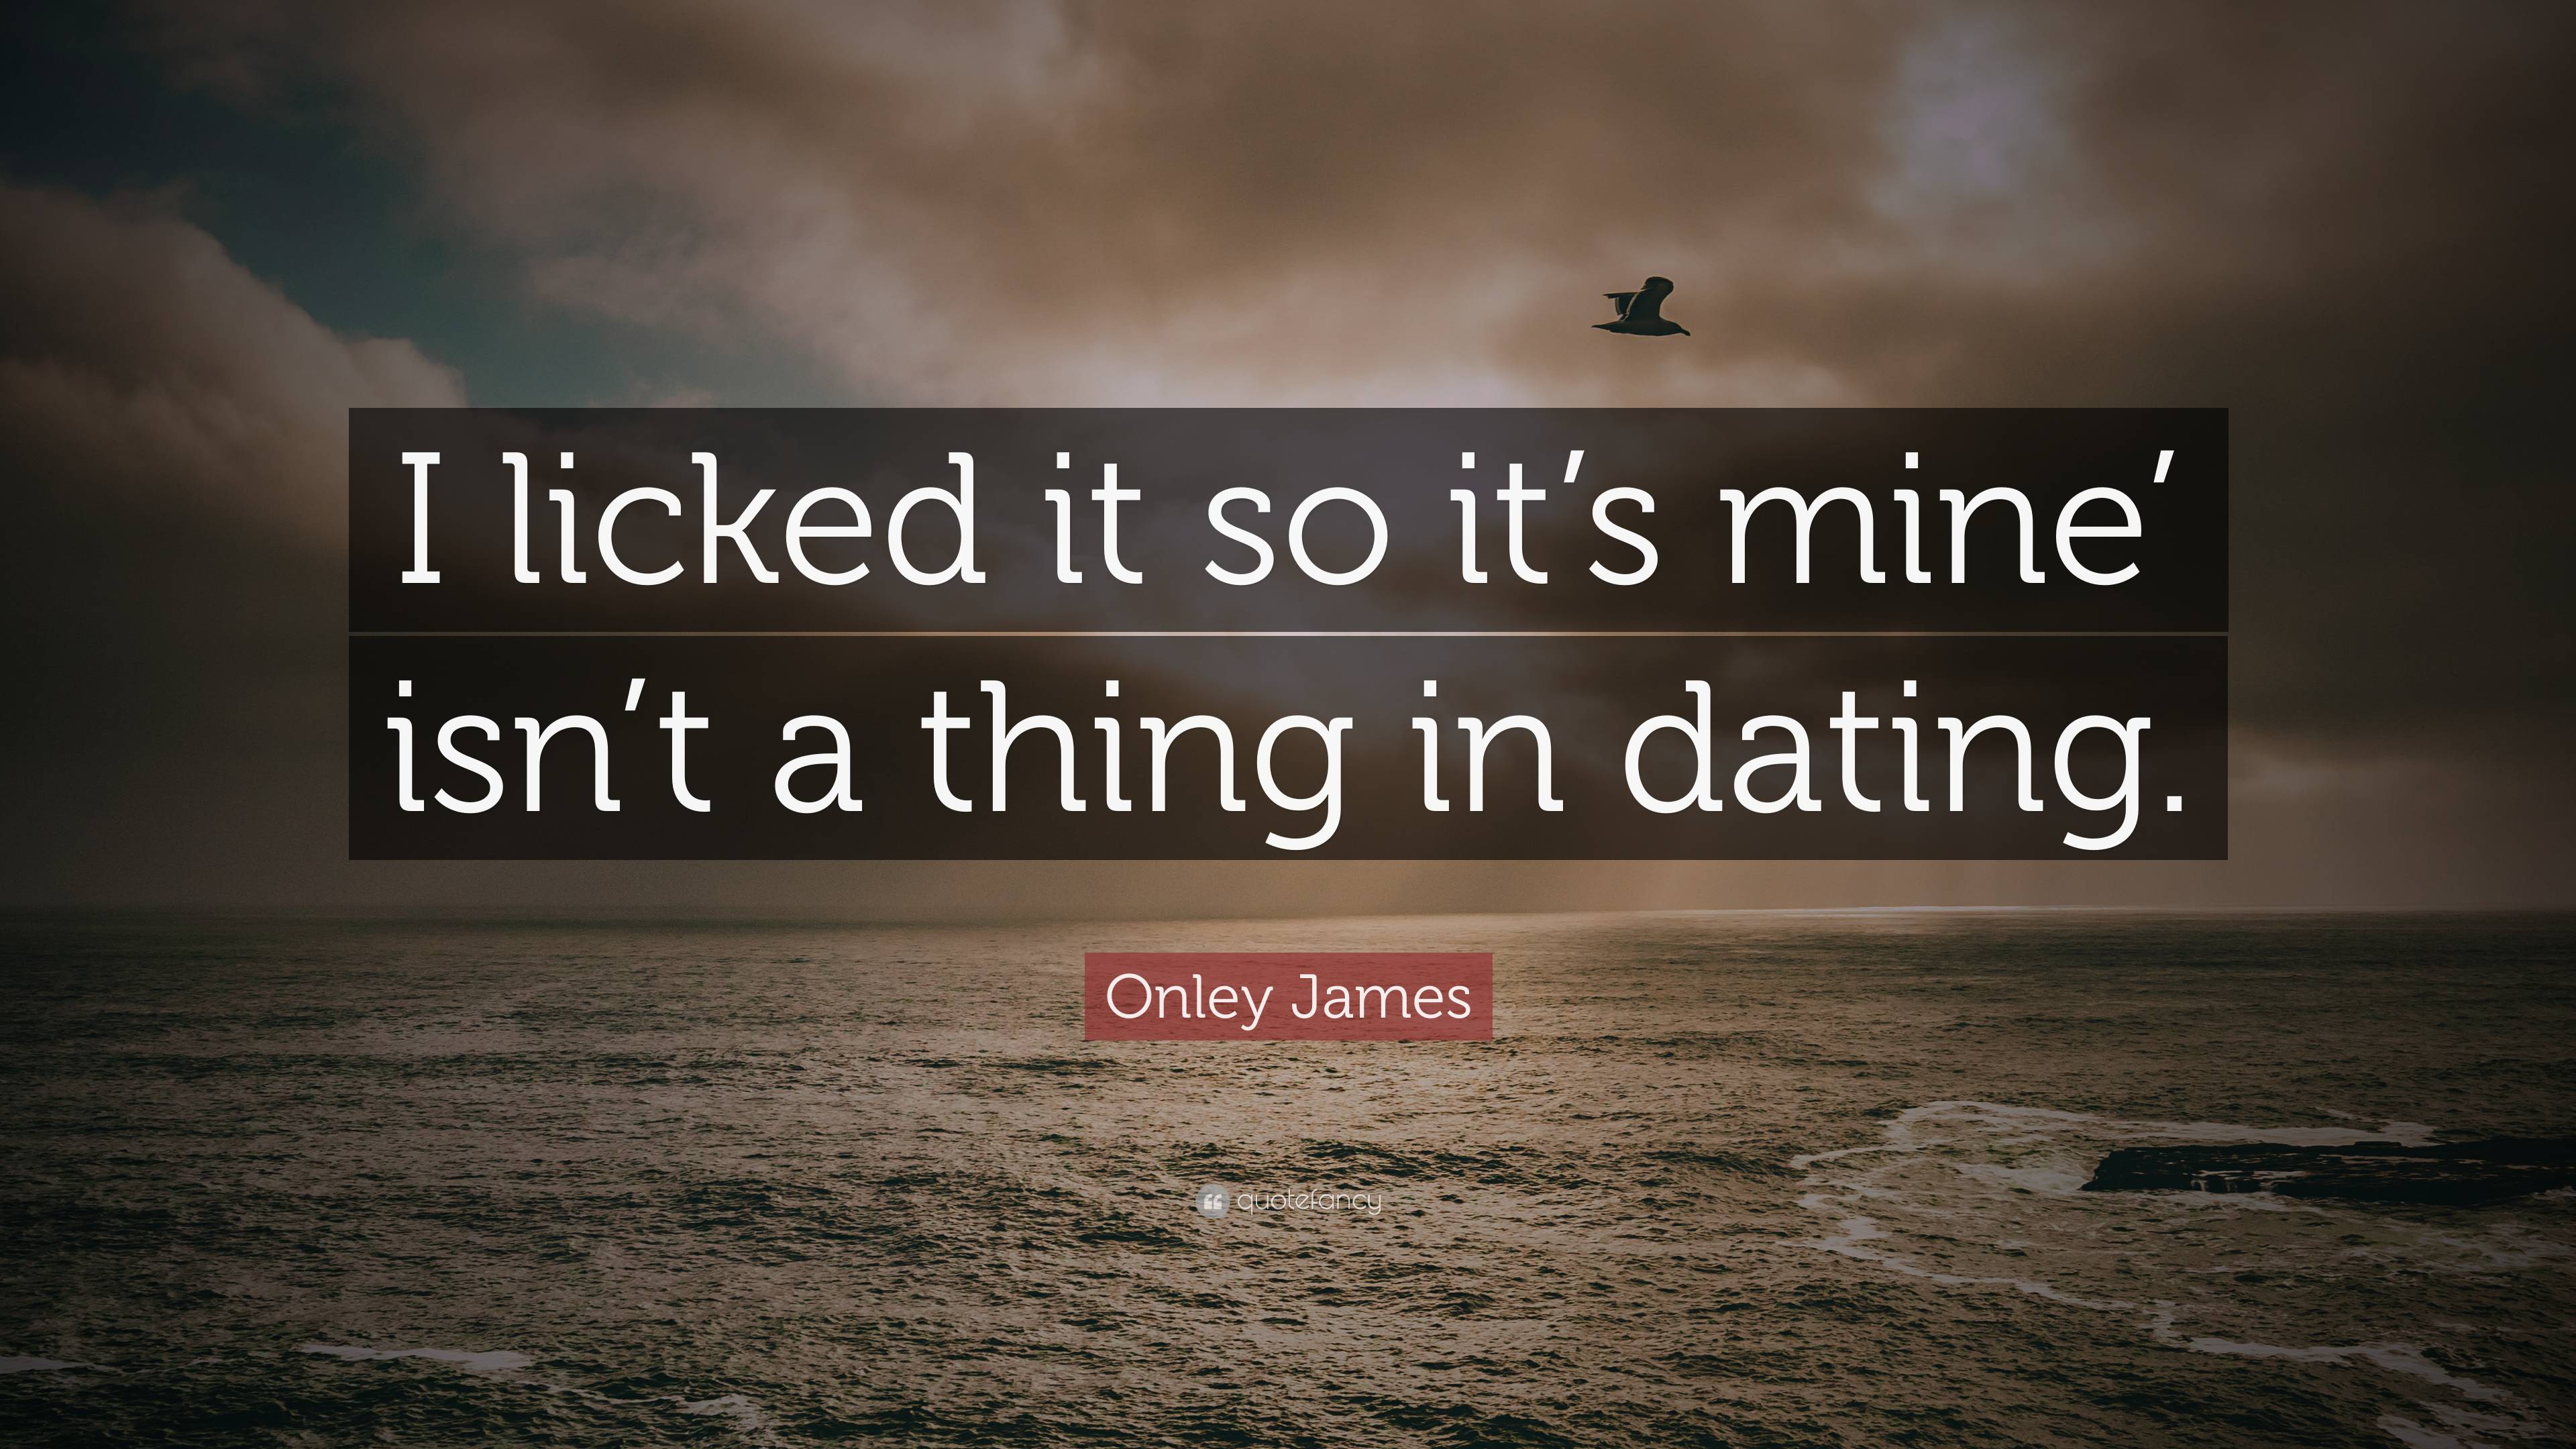 https://quotefancy.com/media/wallpaper/3840x2160/7222211-Onley-James-Quote-I-licked-it-so-it-s-mine-isn-t-a-thing-in-dating.jpg